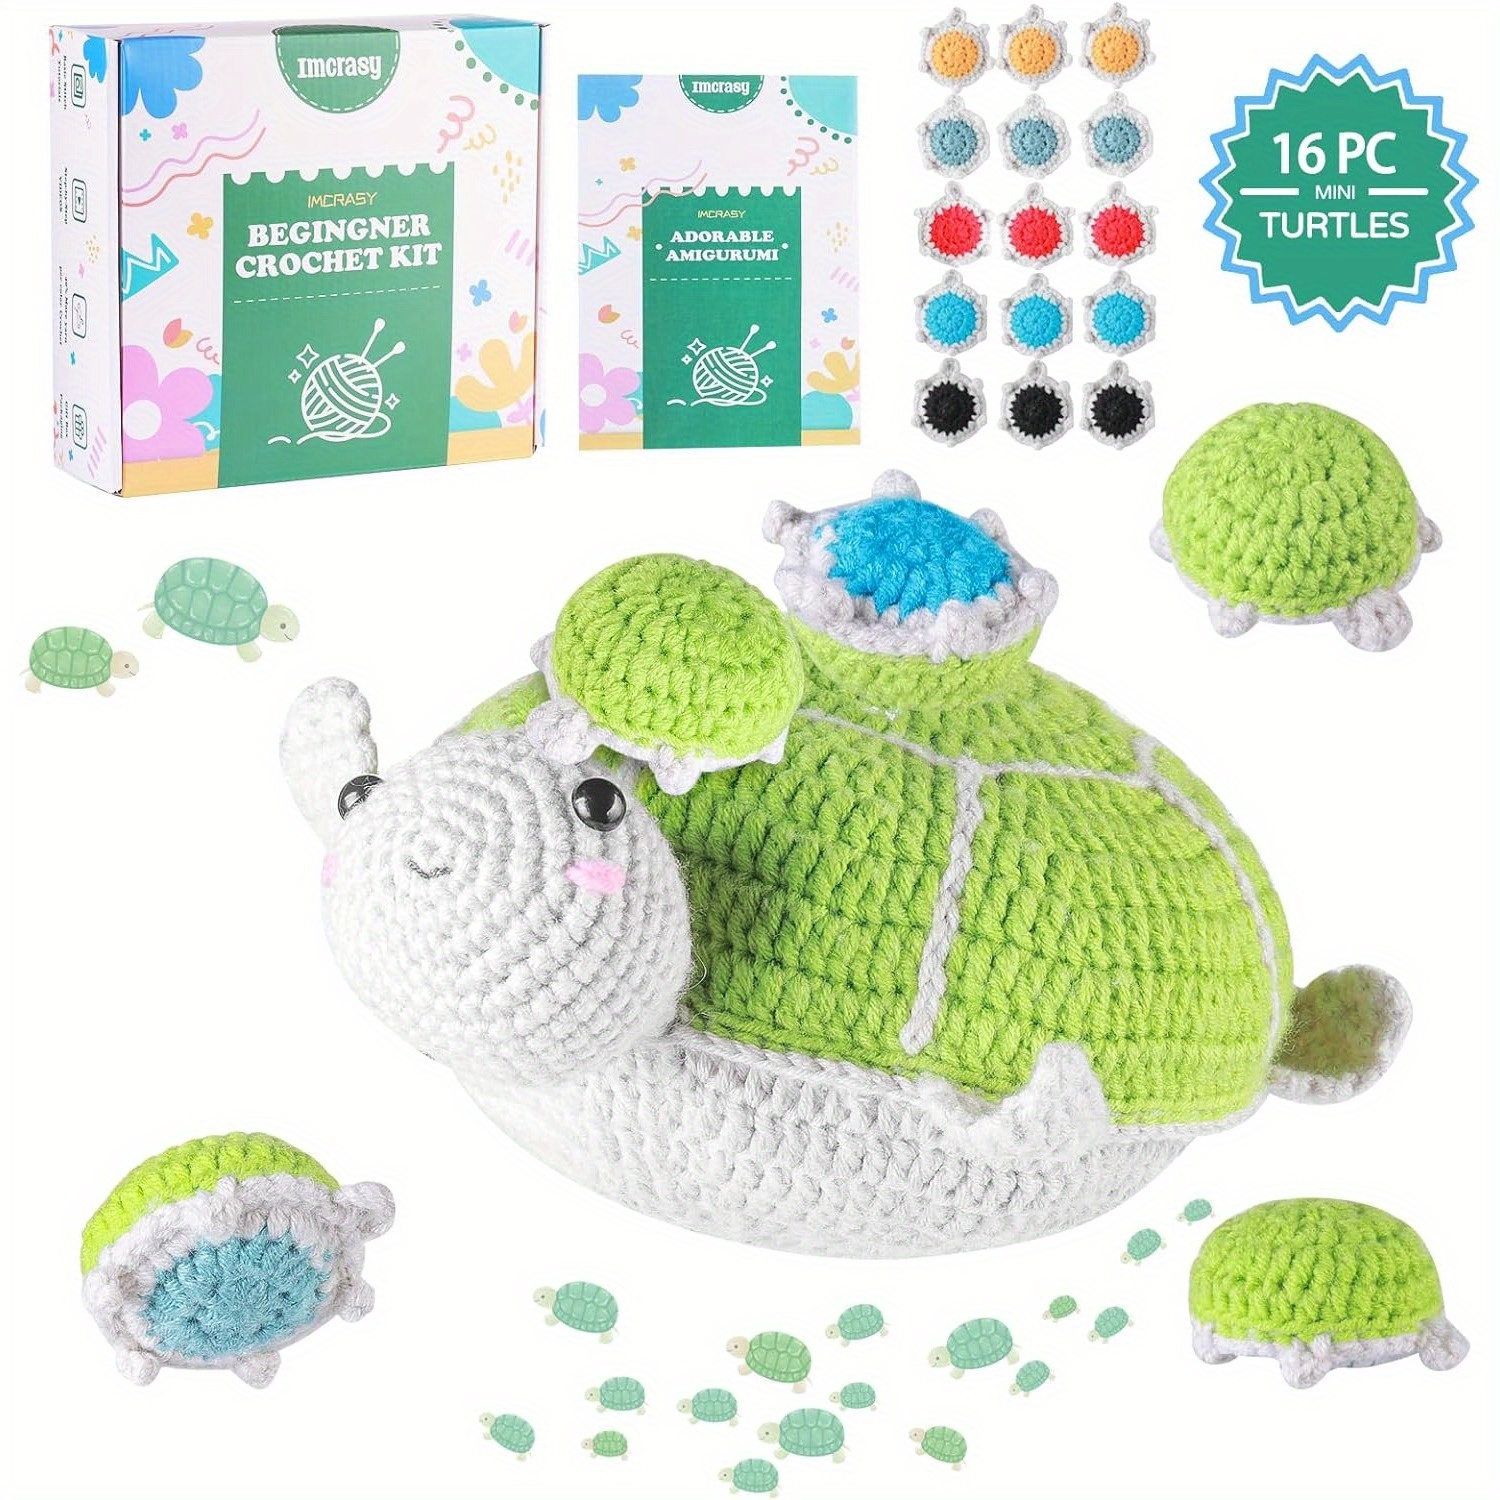 

Crochet Kit | Crochet Kit For Beginners | Beginner Crochet Kit With Step By Step Video Lessons | 16 Pc Cute Turles Memory Matching Game Crochet Kit With Complete Accessories (40%+ Yarn)